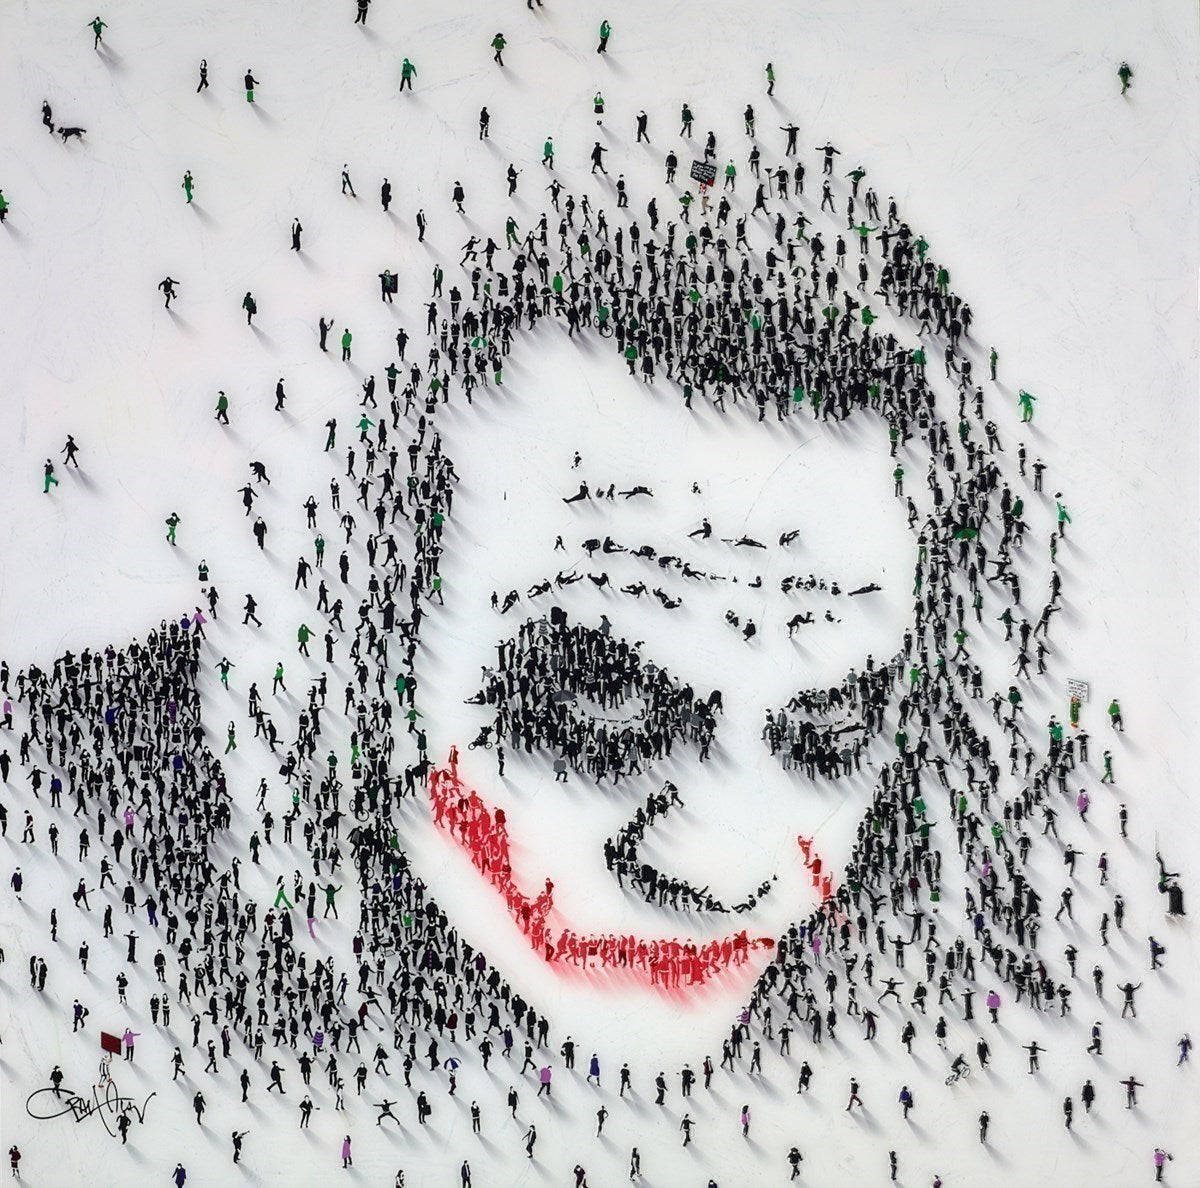 "Why So Serious?". Wallpaper